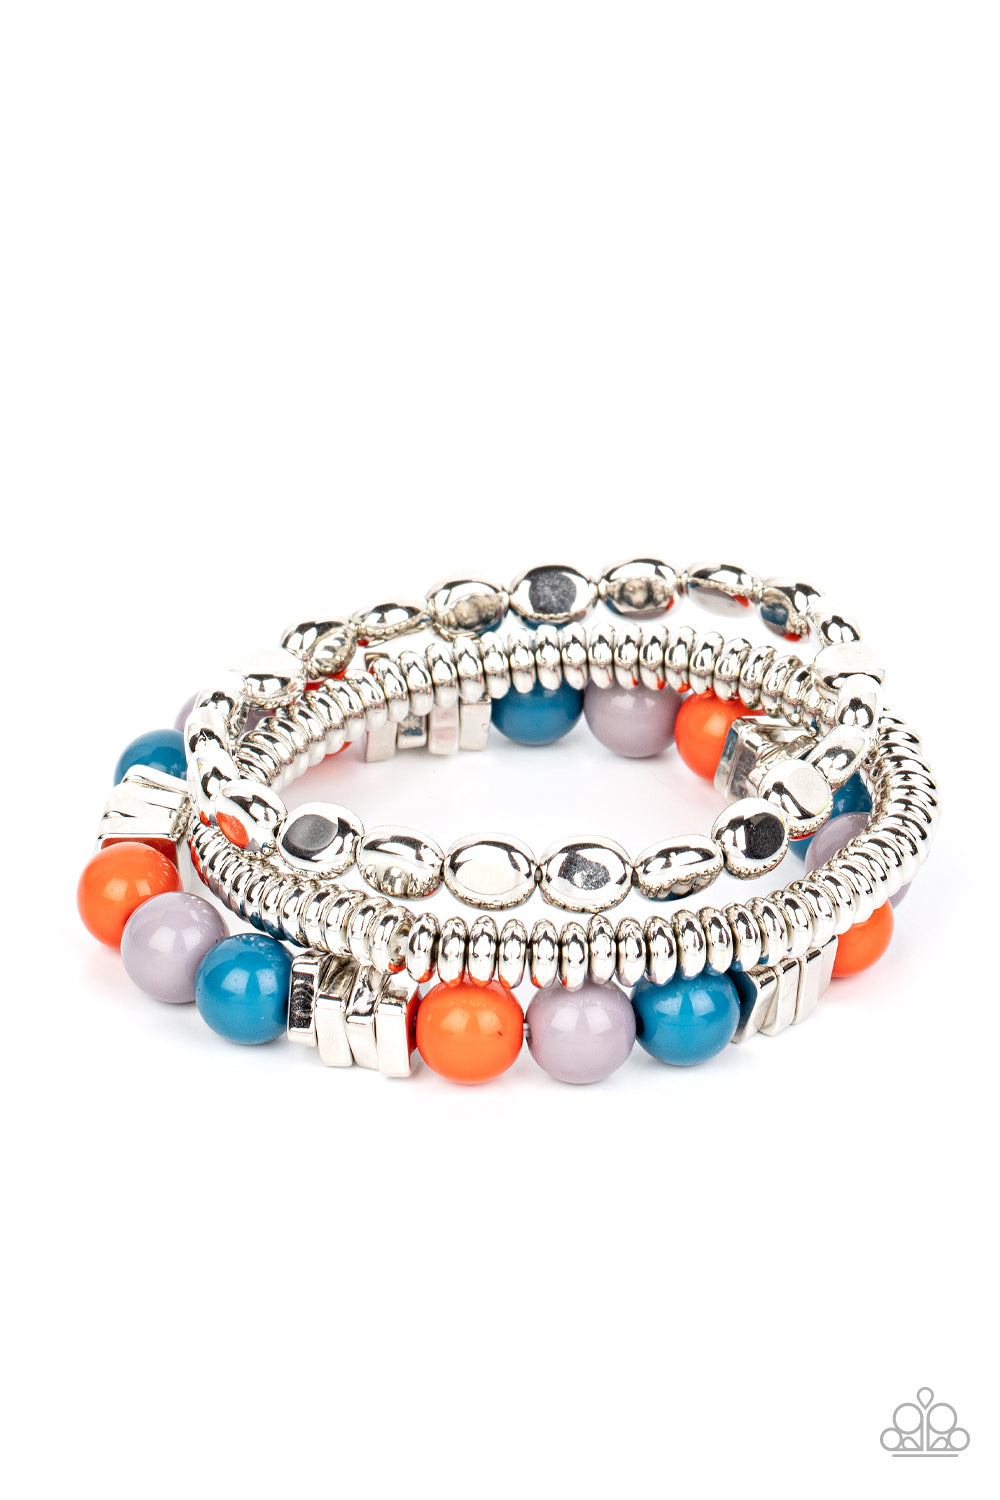 Tour de Tourist Multi Bracelet - Paparazzi Accessories  A mismatched collection of silver discs, silver cubes, bubbly multicolored acrylic, and silver pebble-like beads are threaded along stretchy bands around the wrist, creating fiery layers.  All Paparazzi Accessories are lead free and nickel free!  Sold as one set of three bracelets.